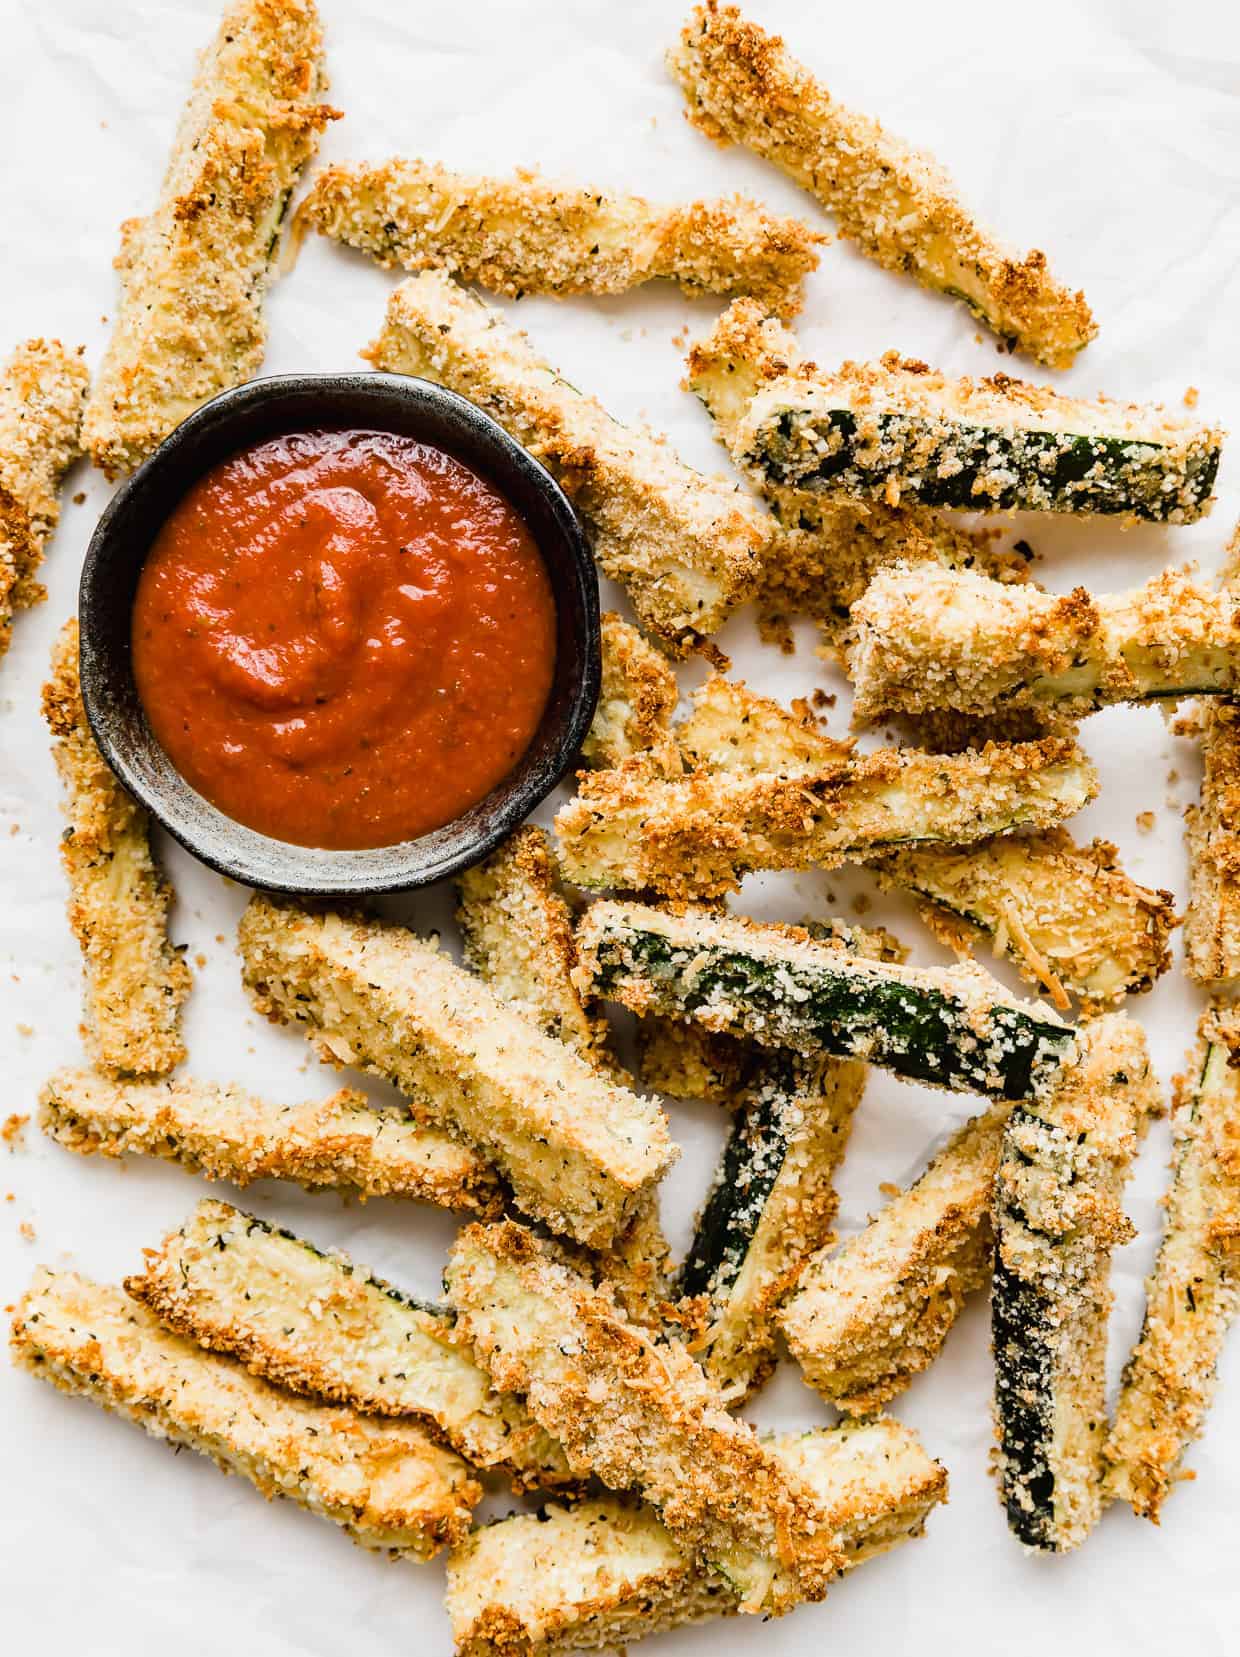 Zucchini fries on a white background with a small bowl of marinara sauce next to the fries.